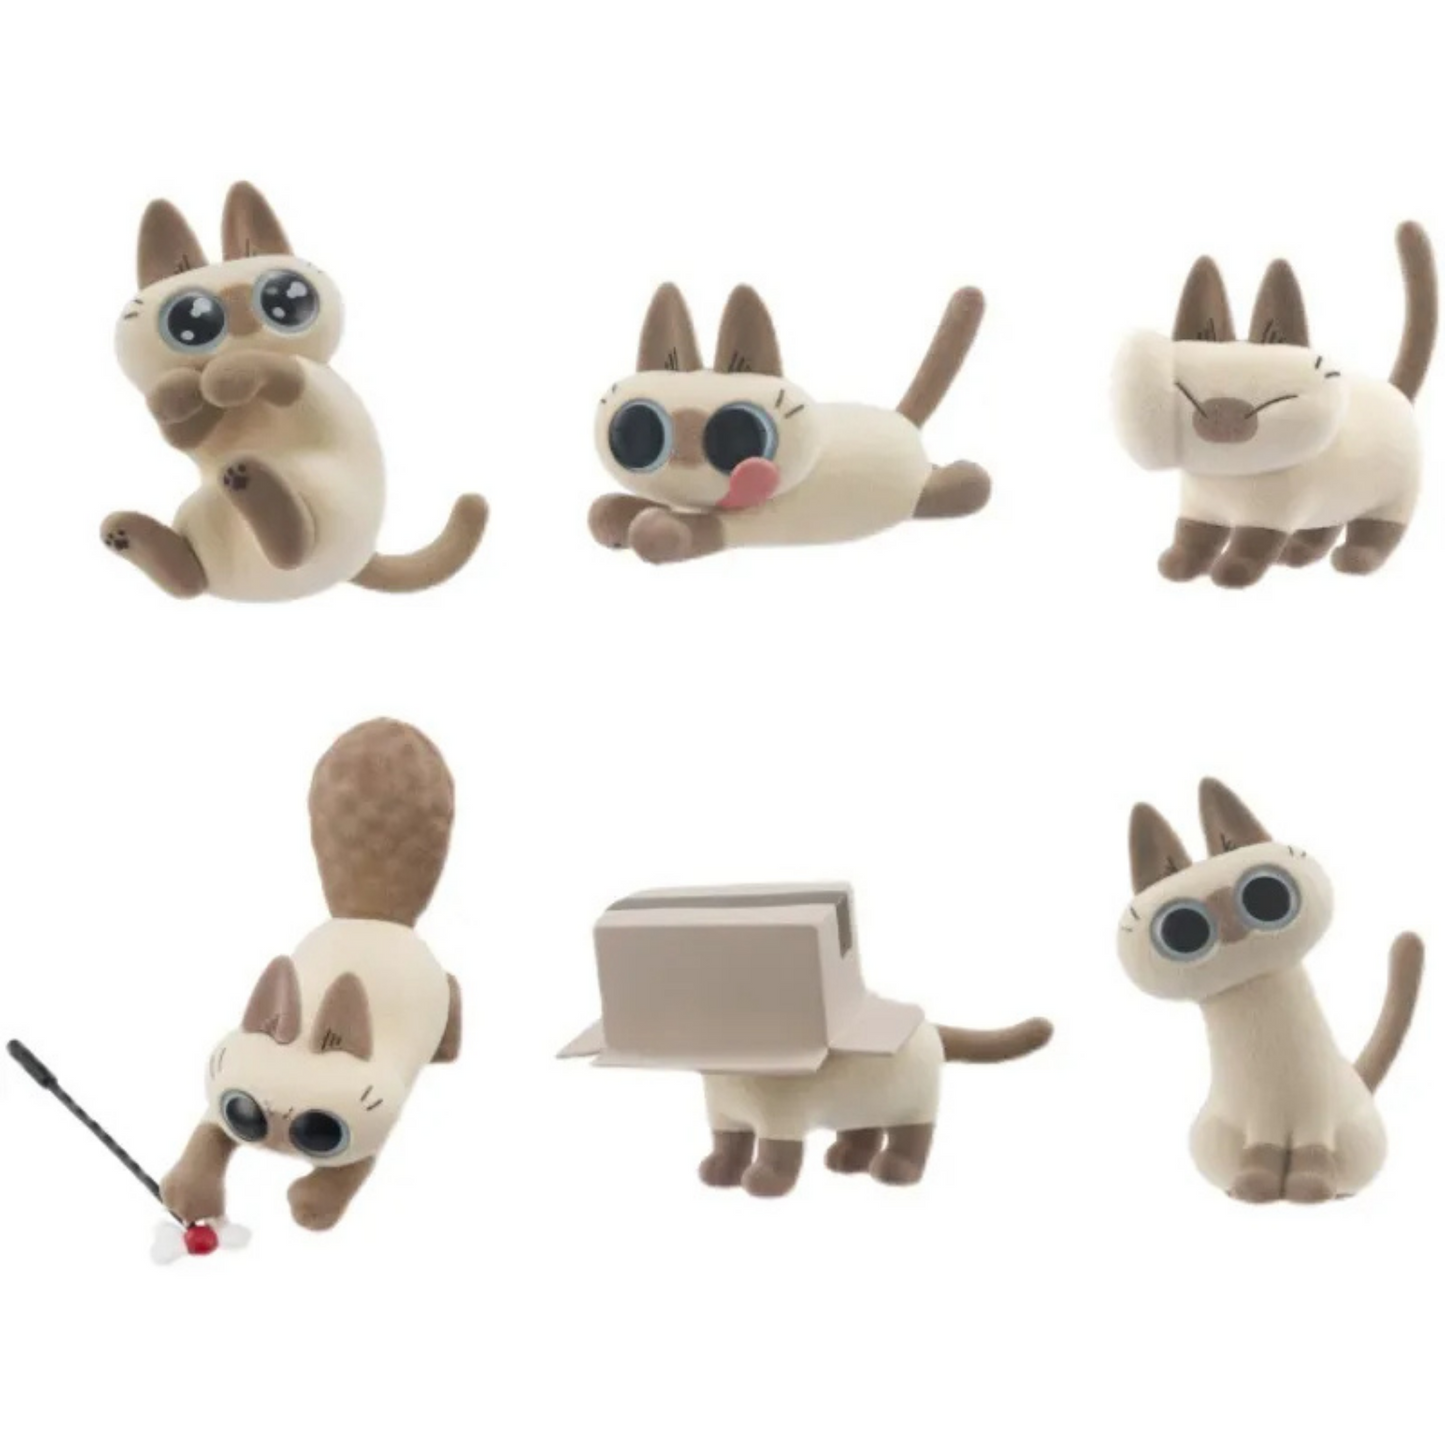 Azuki Can Daily Life Series 2 Blind Box - Whole Set of 6